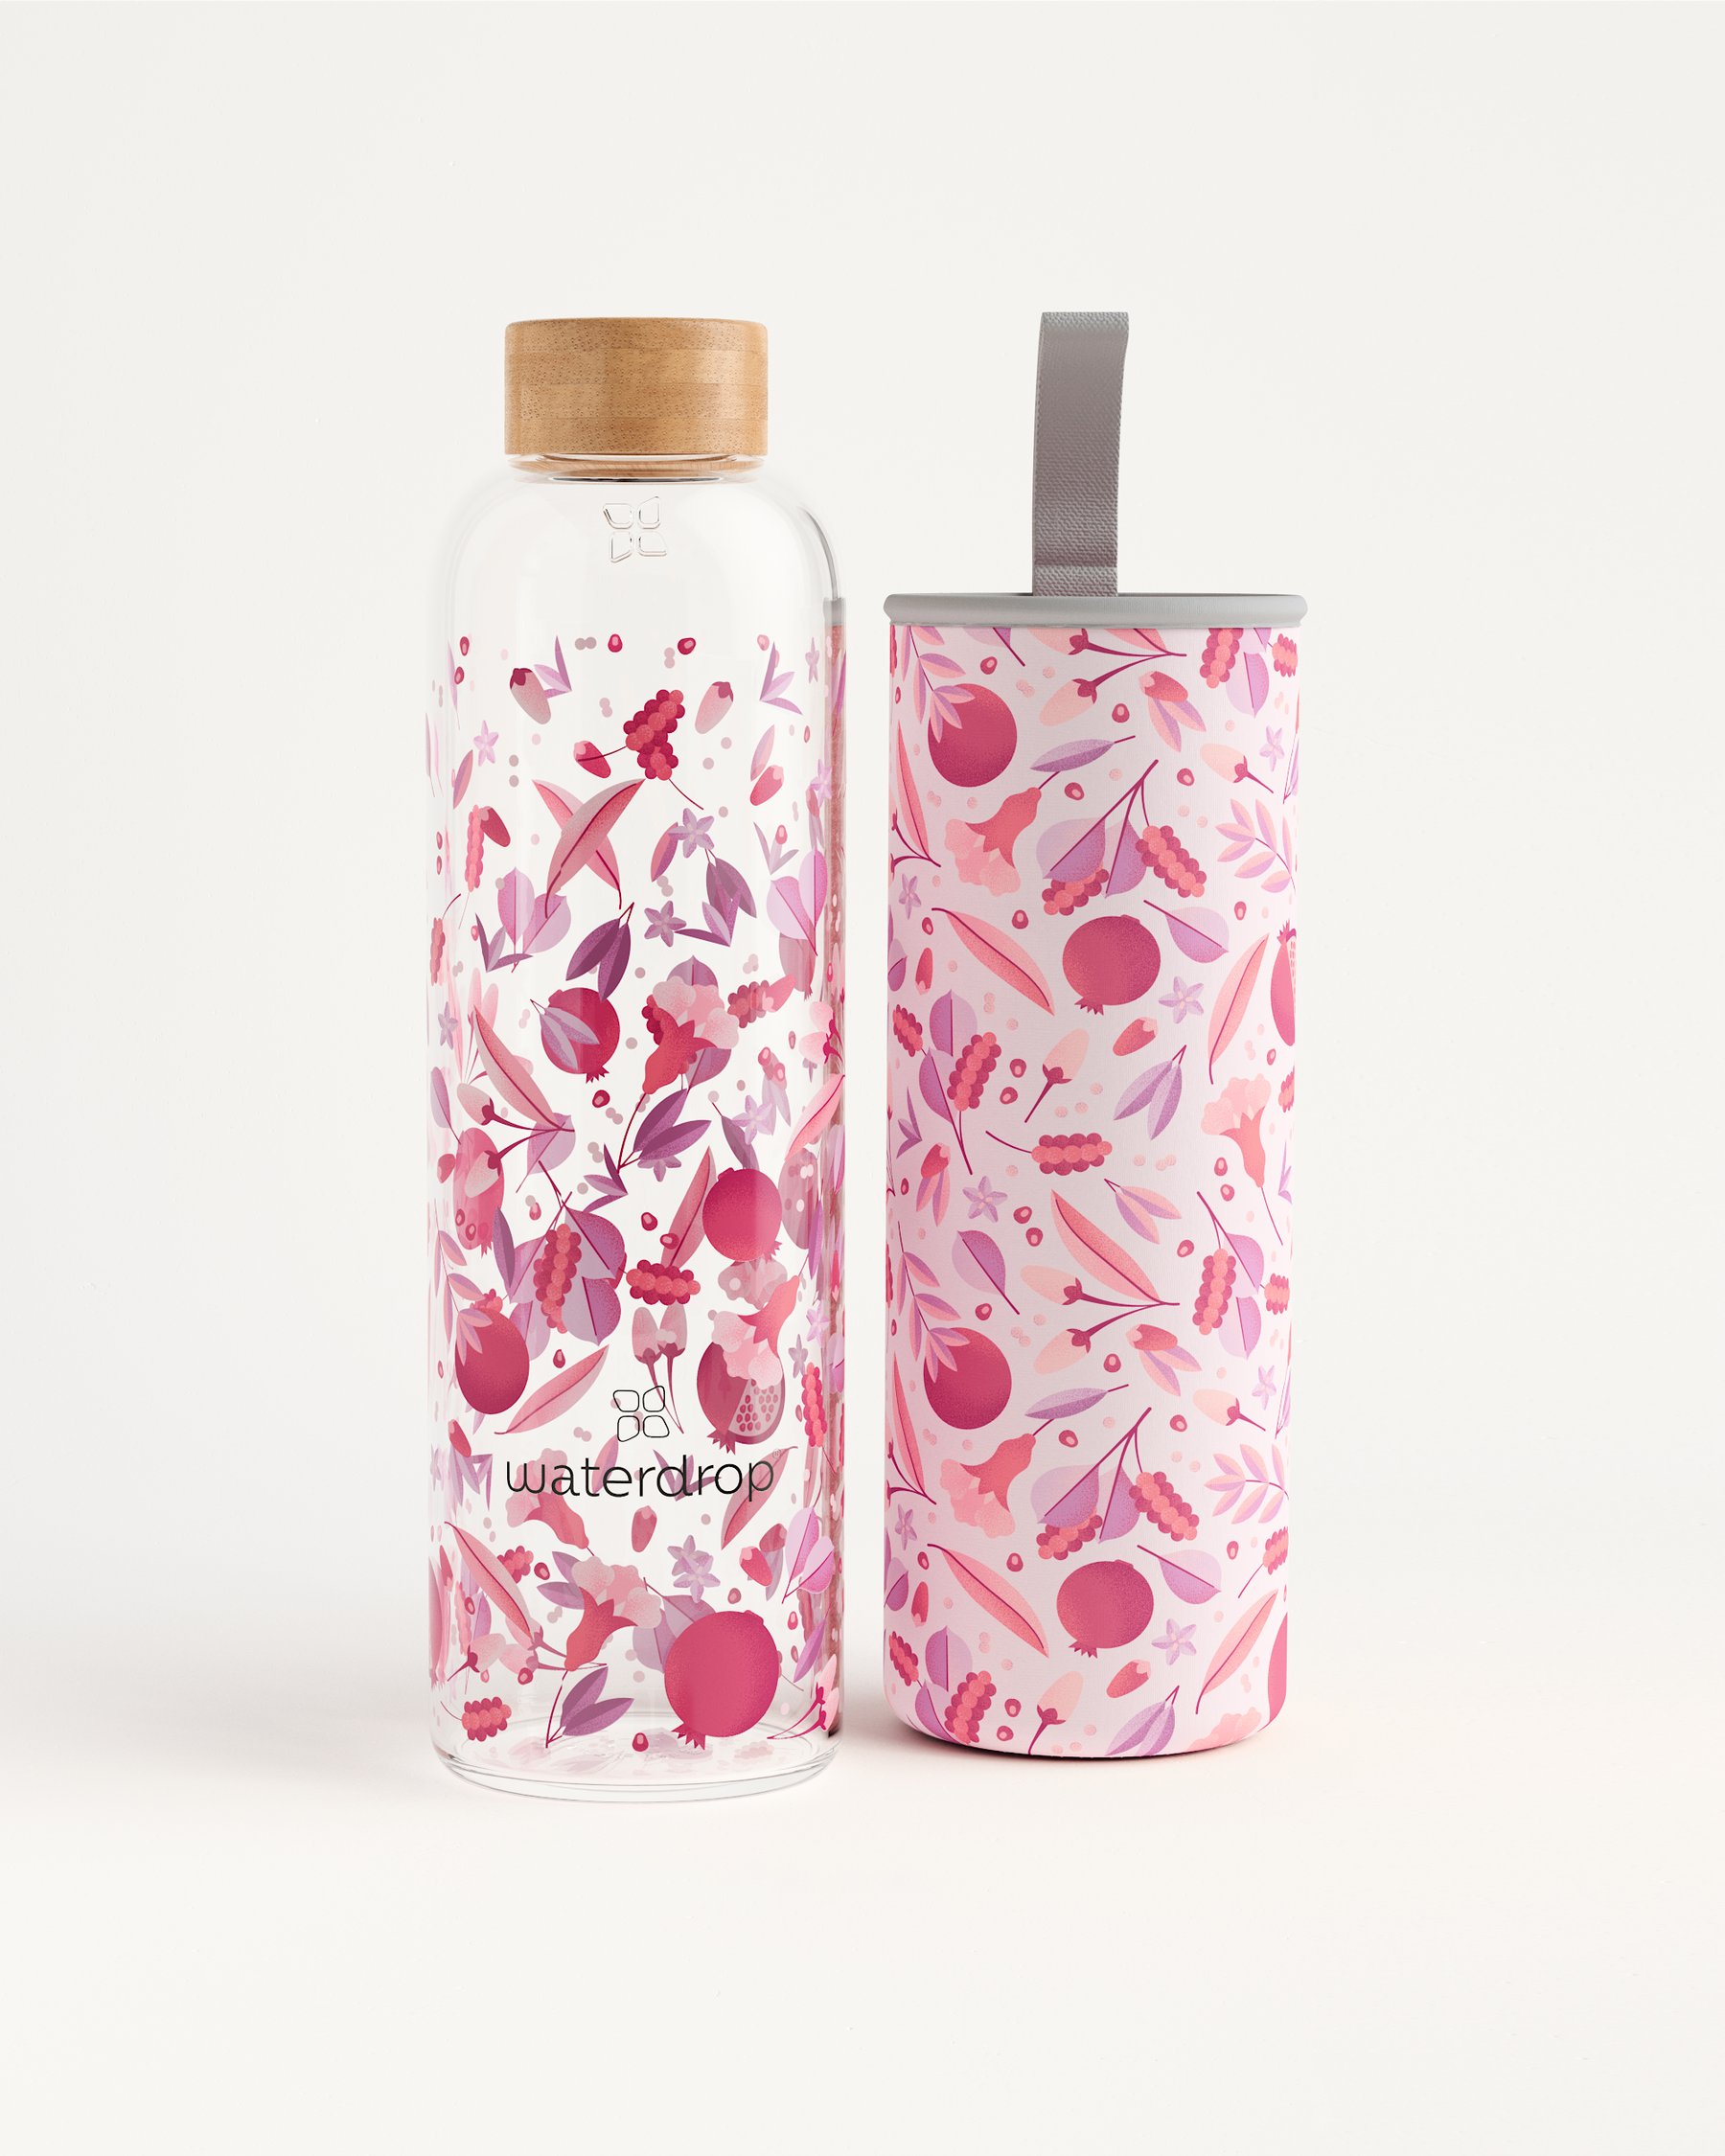 Made in USA - Clearly Love — Love Bottle - Beautiful Reusable Glass Water  Bottles